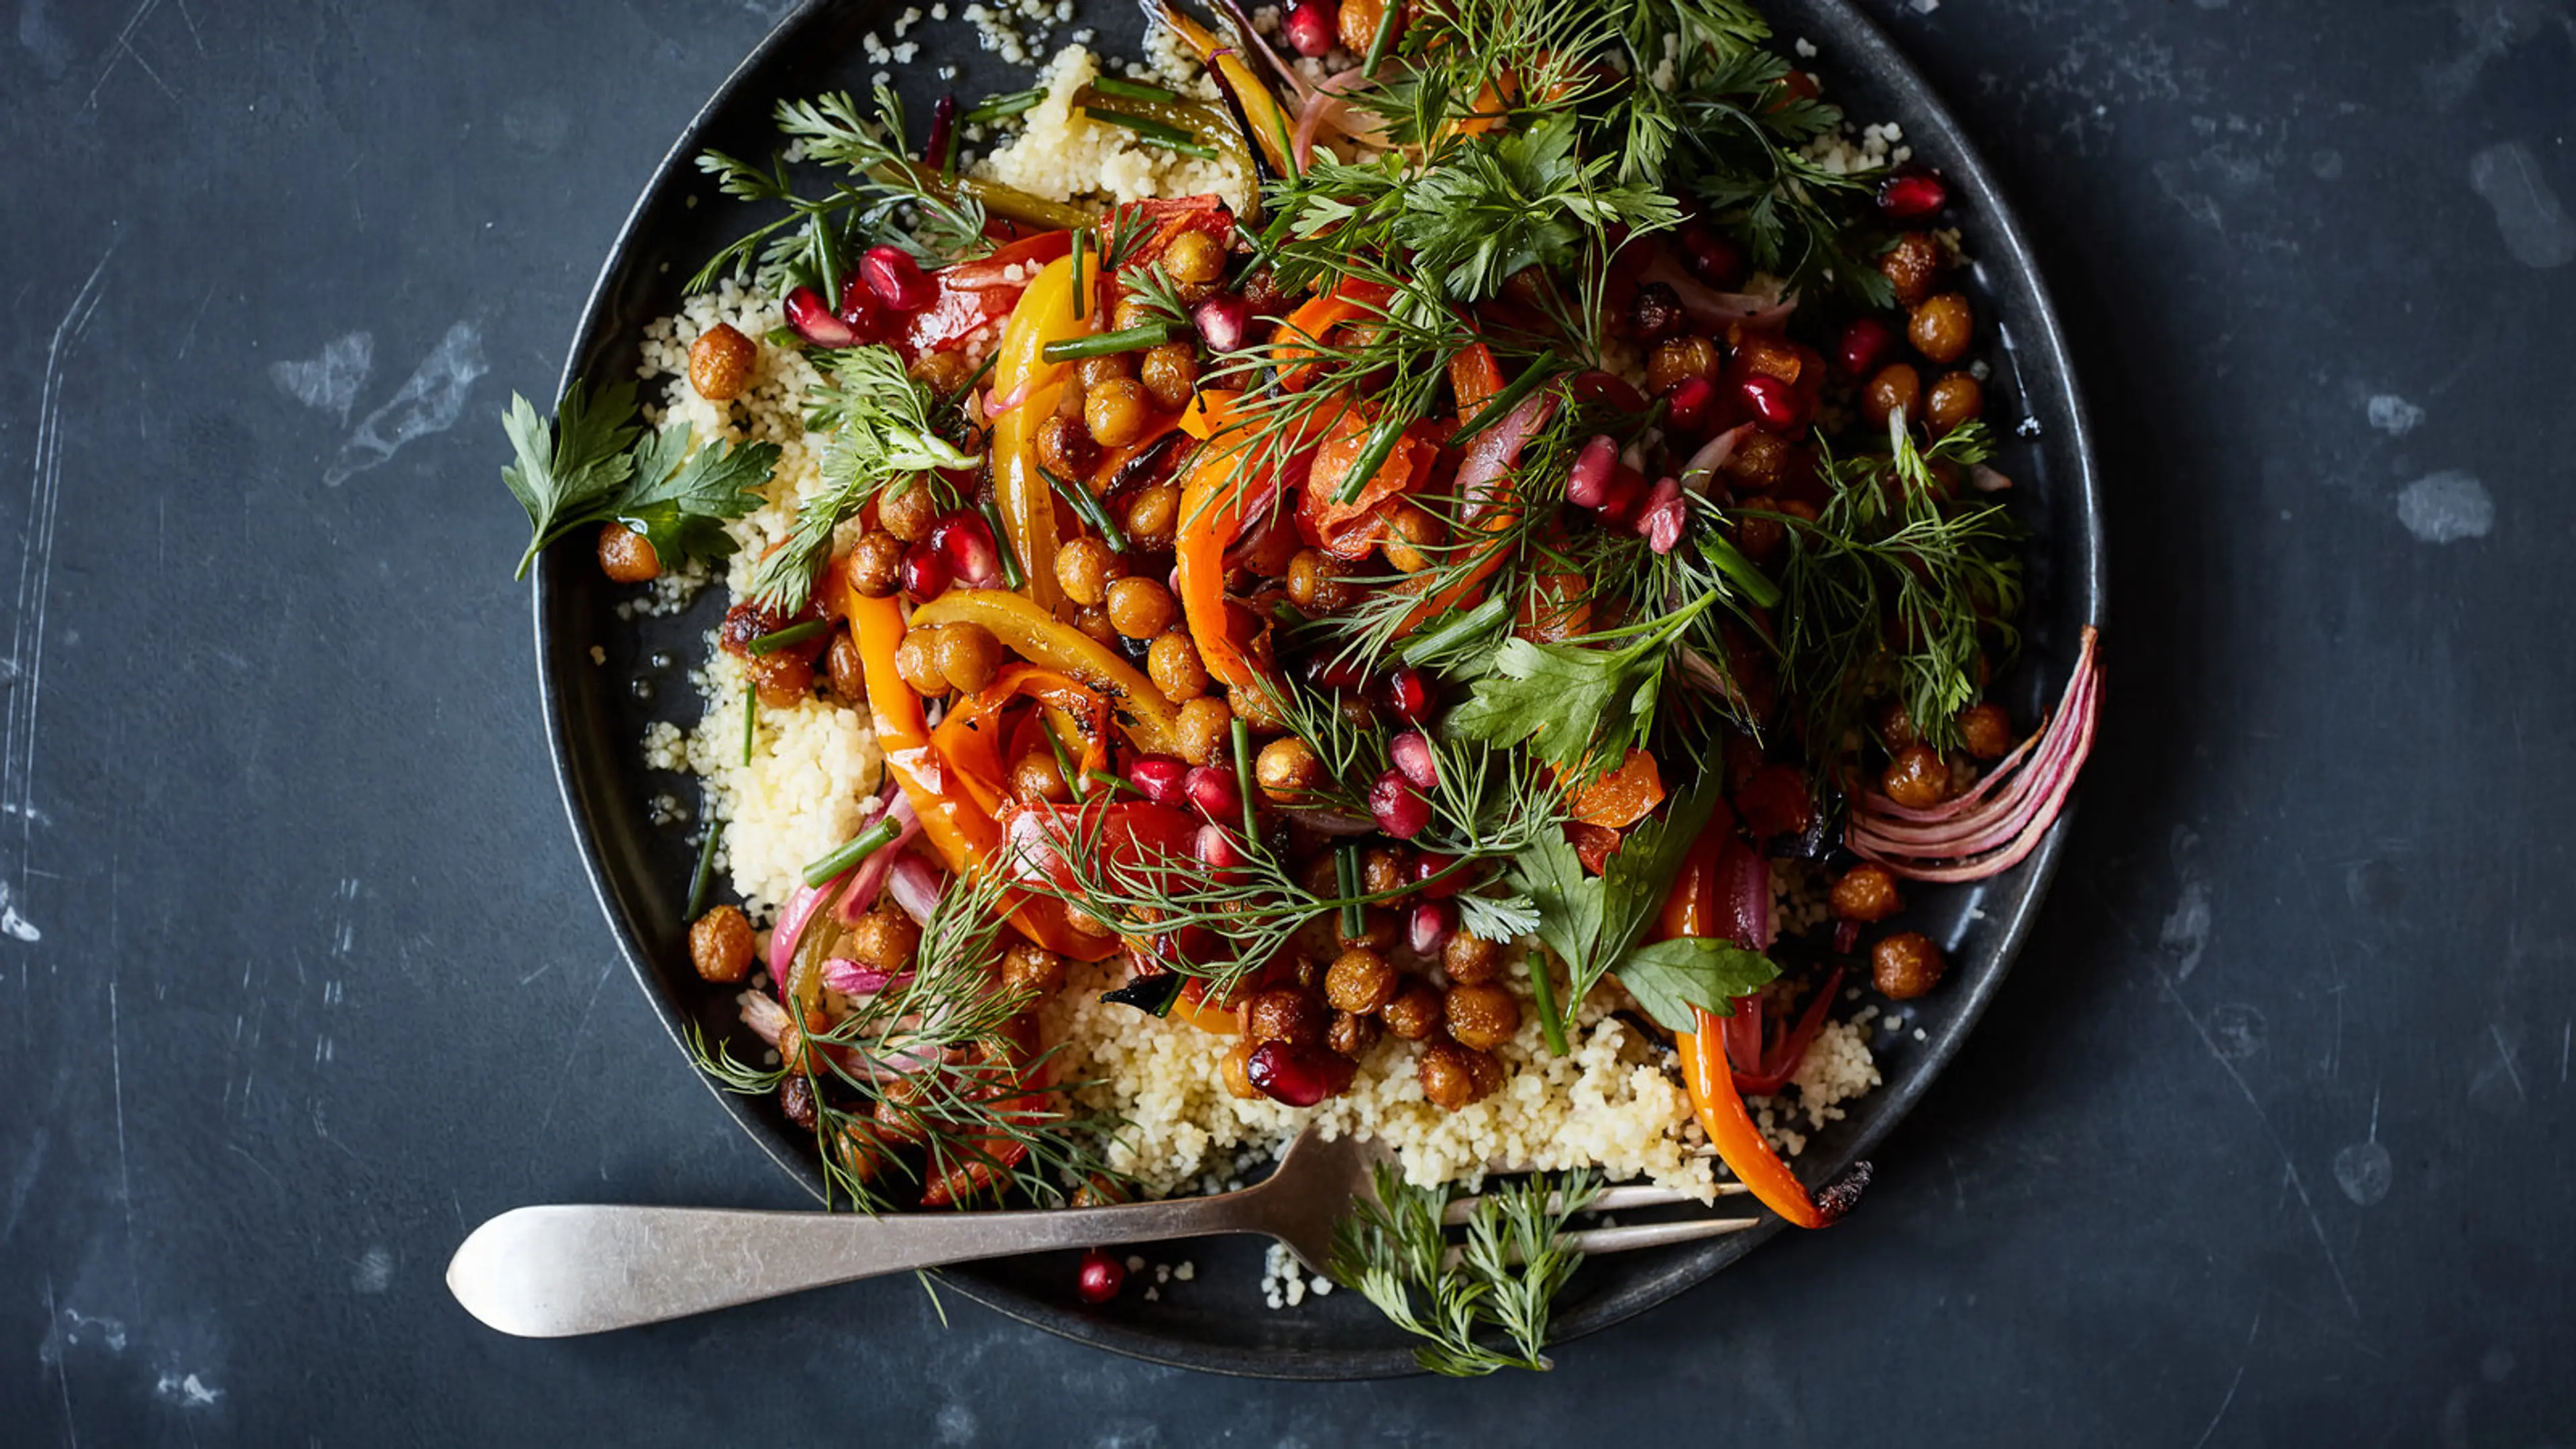 Crispy Spiced Chickpeas With Peppers and Tomatoes